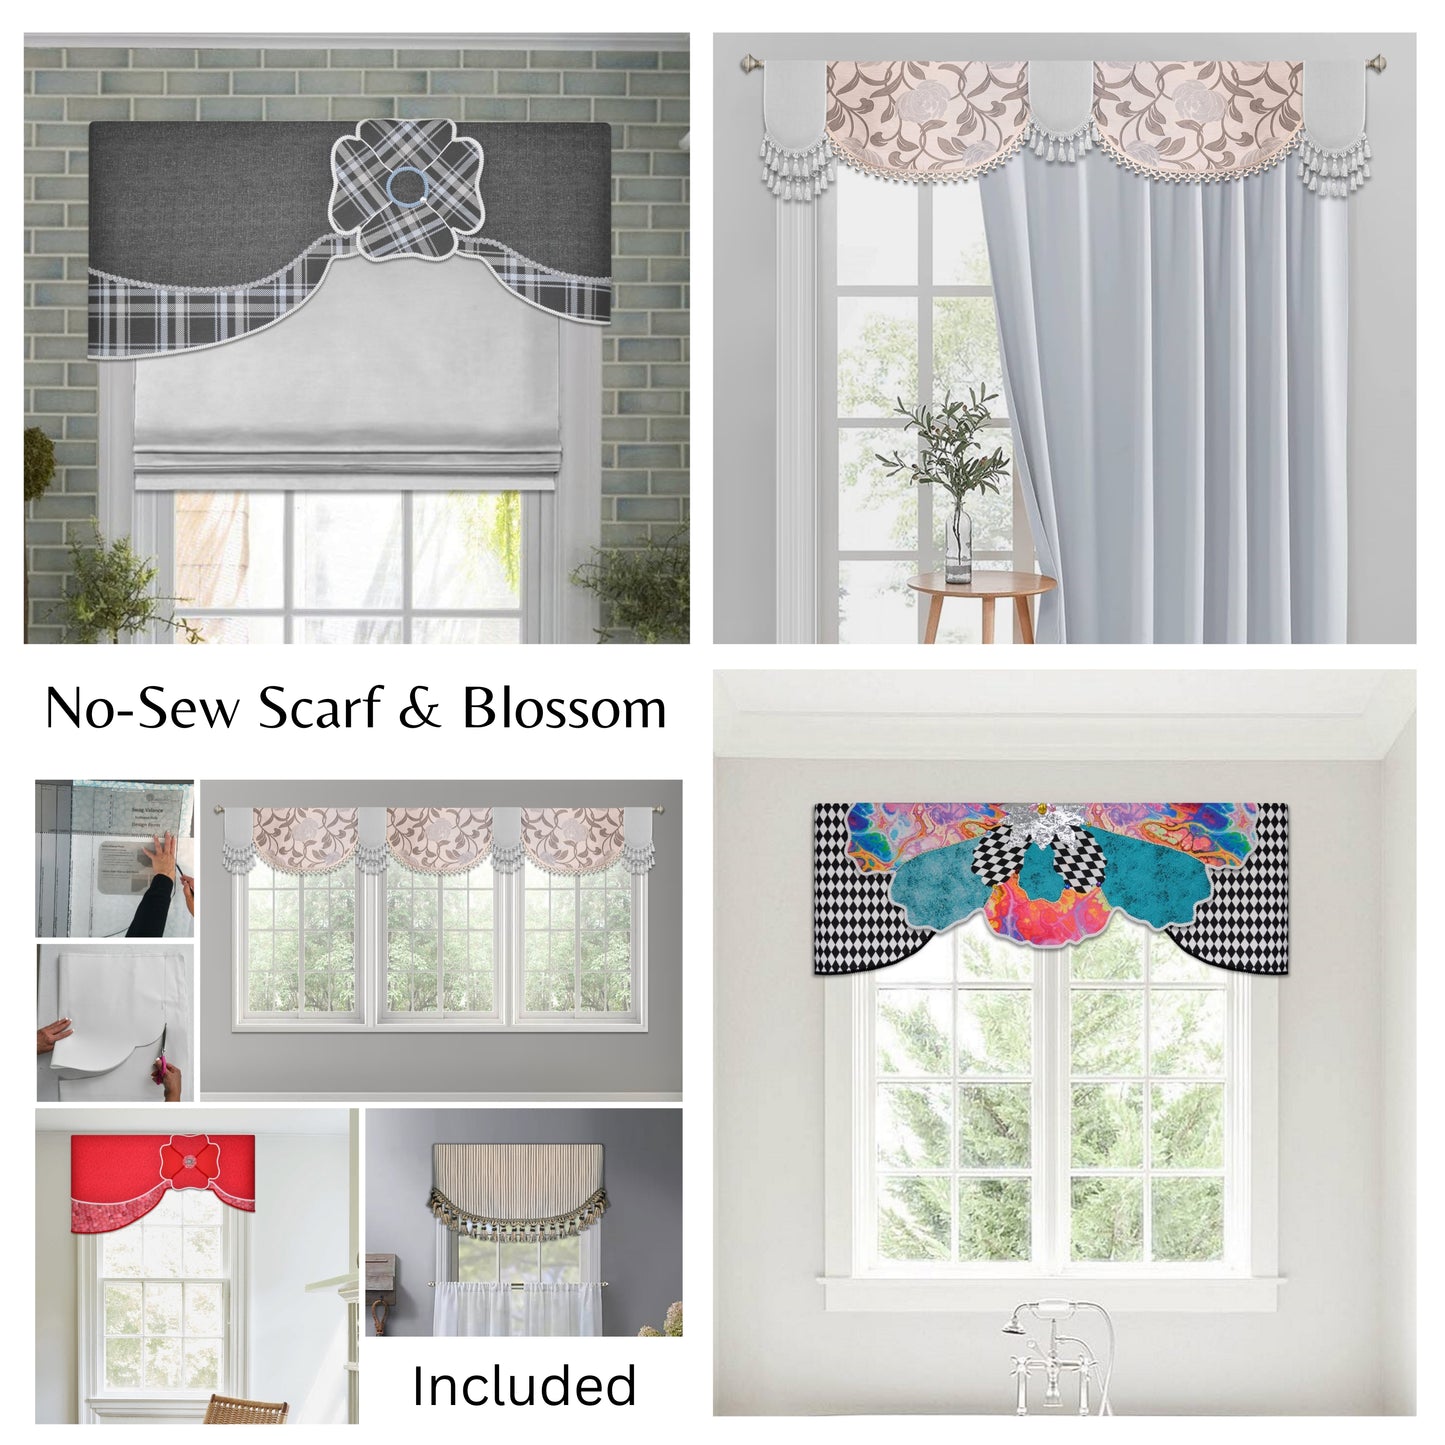 Traceable Designer no-sew master decorator kit includes unique swag, scarf, and blossom valance styles.